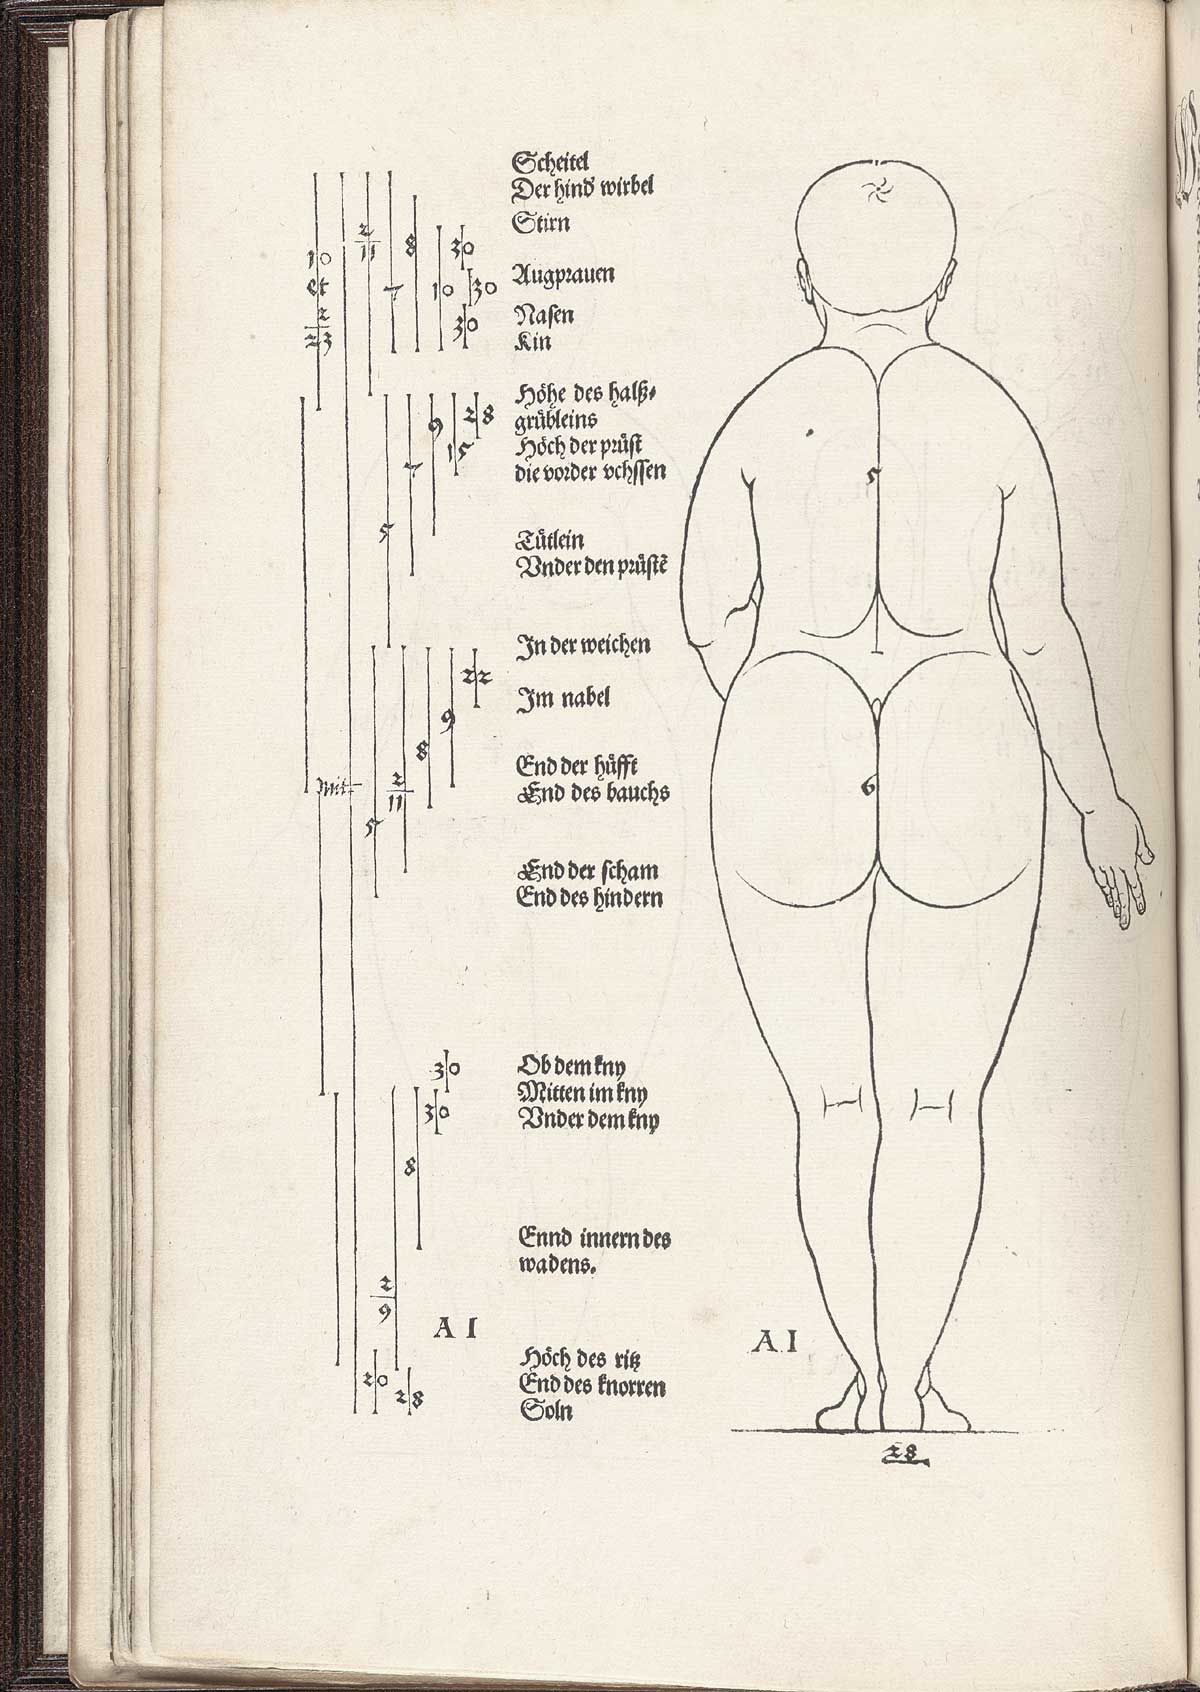 Woodcut image of a standing nude female figure with her back to the viewer, with index letters showing proportions, for instance from the bottom of the chin to the top of the shoulder, from Albrecht Dürer’s Vier Bücher von menschlicher Proportion, NLM Call no. WZ 240 D853v 1528.